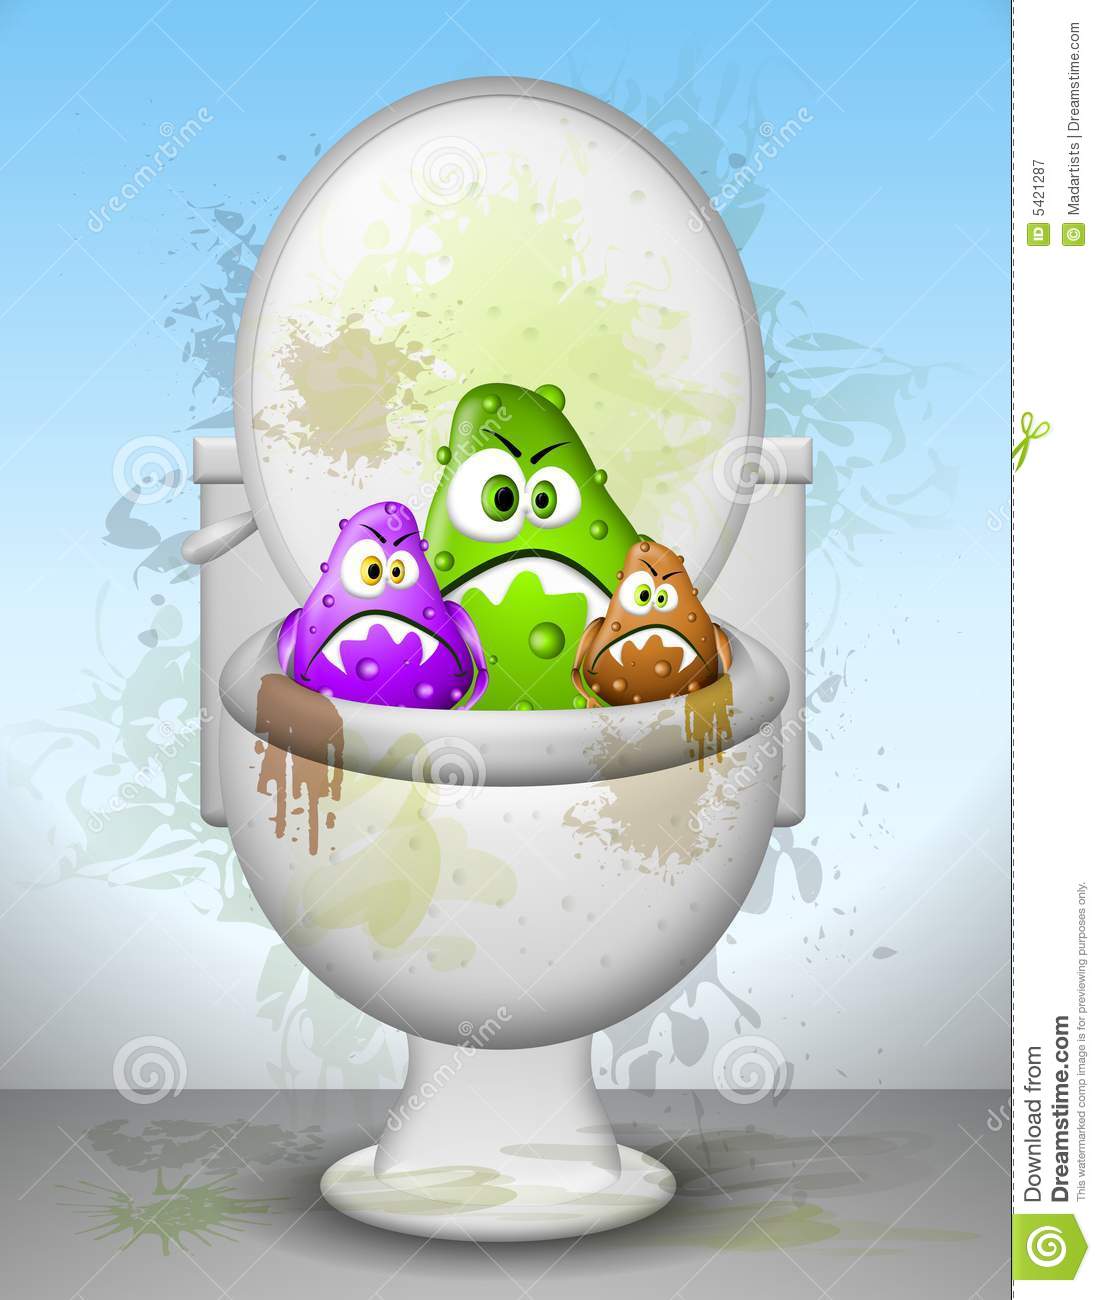     Faces Sticking Out Of A Filthy Toilet Bowl  Somebody Clean That Thing